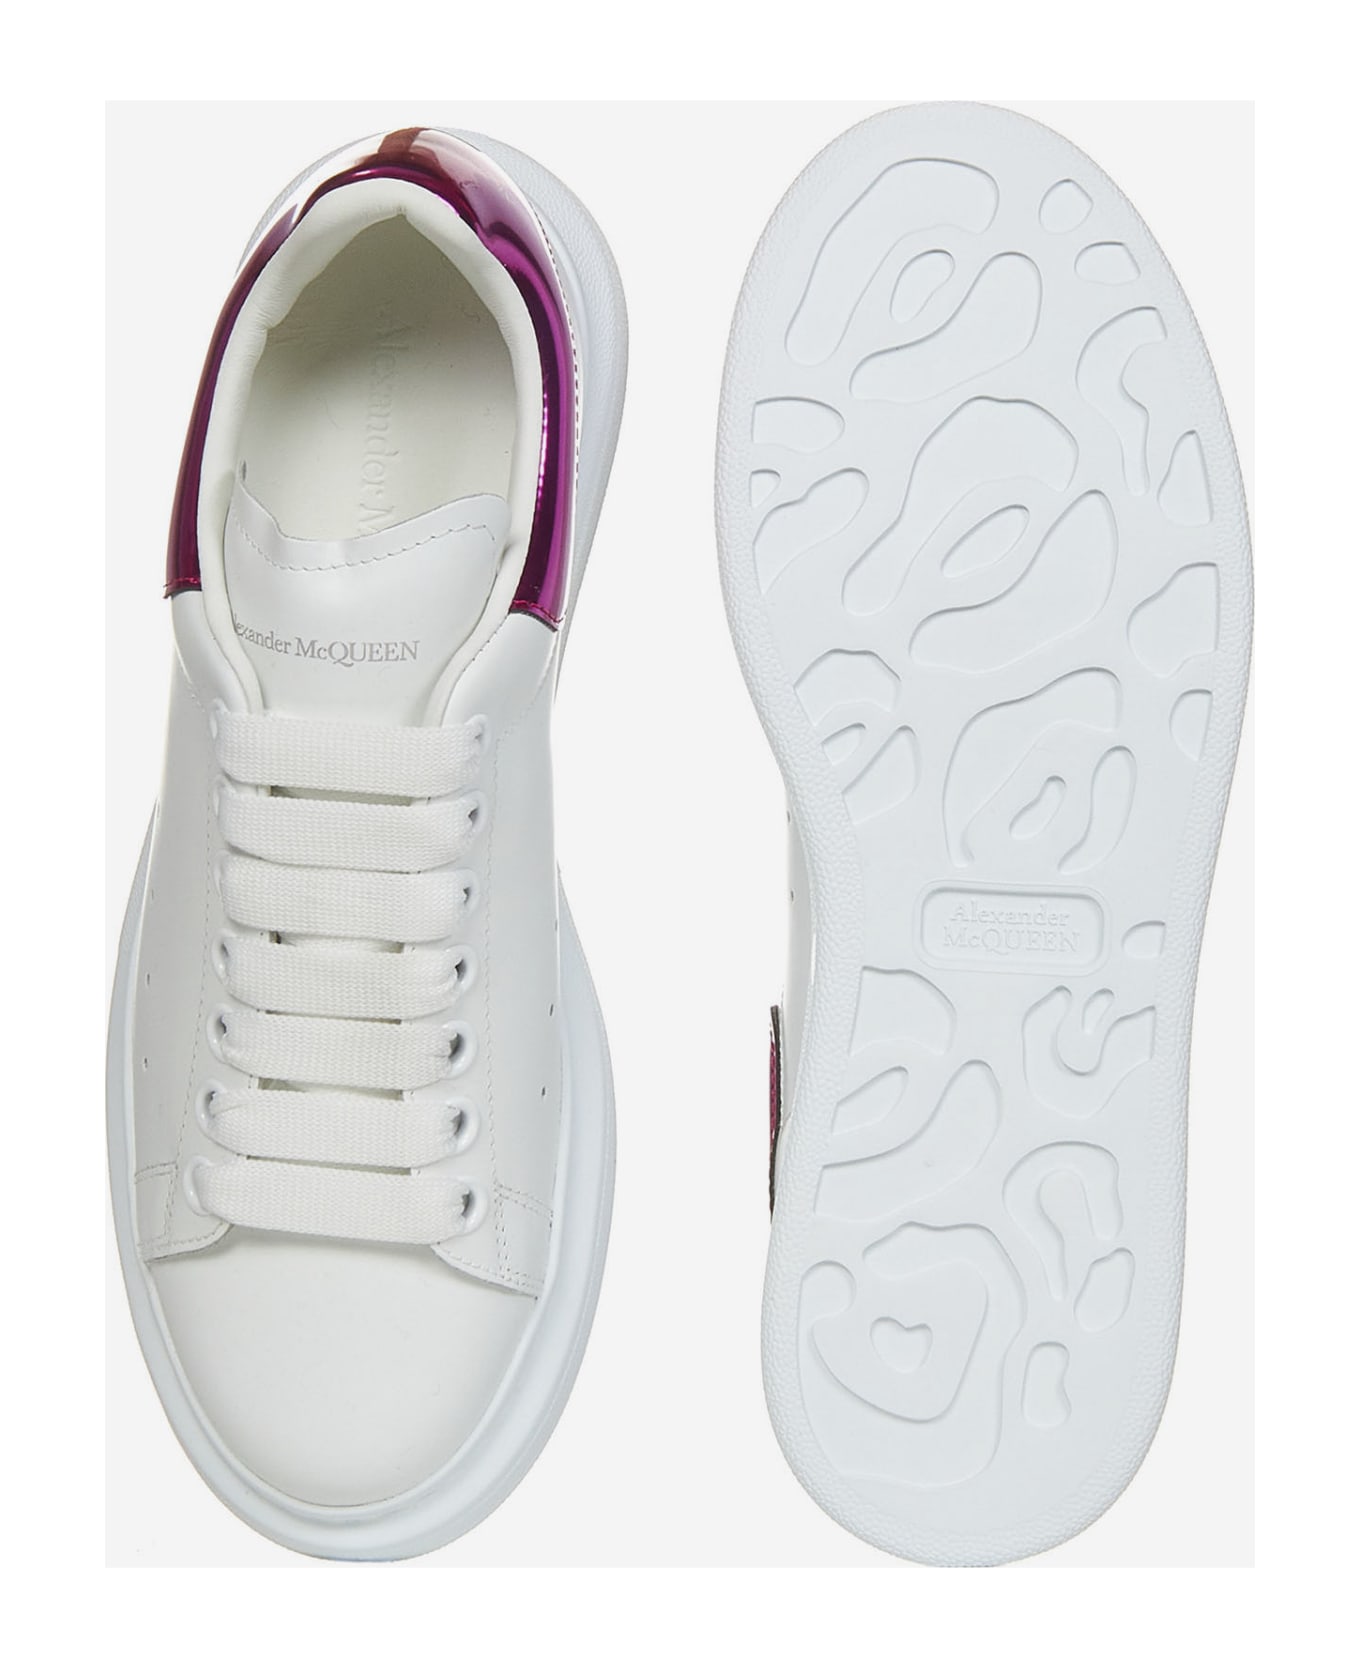 Alexander McQueen White Sneakers With Platform And Metallic Fuchsia Heel Tab In Leather Woman Alexander Mcqueen - White スニーカー